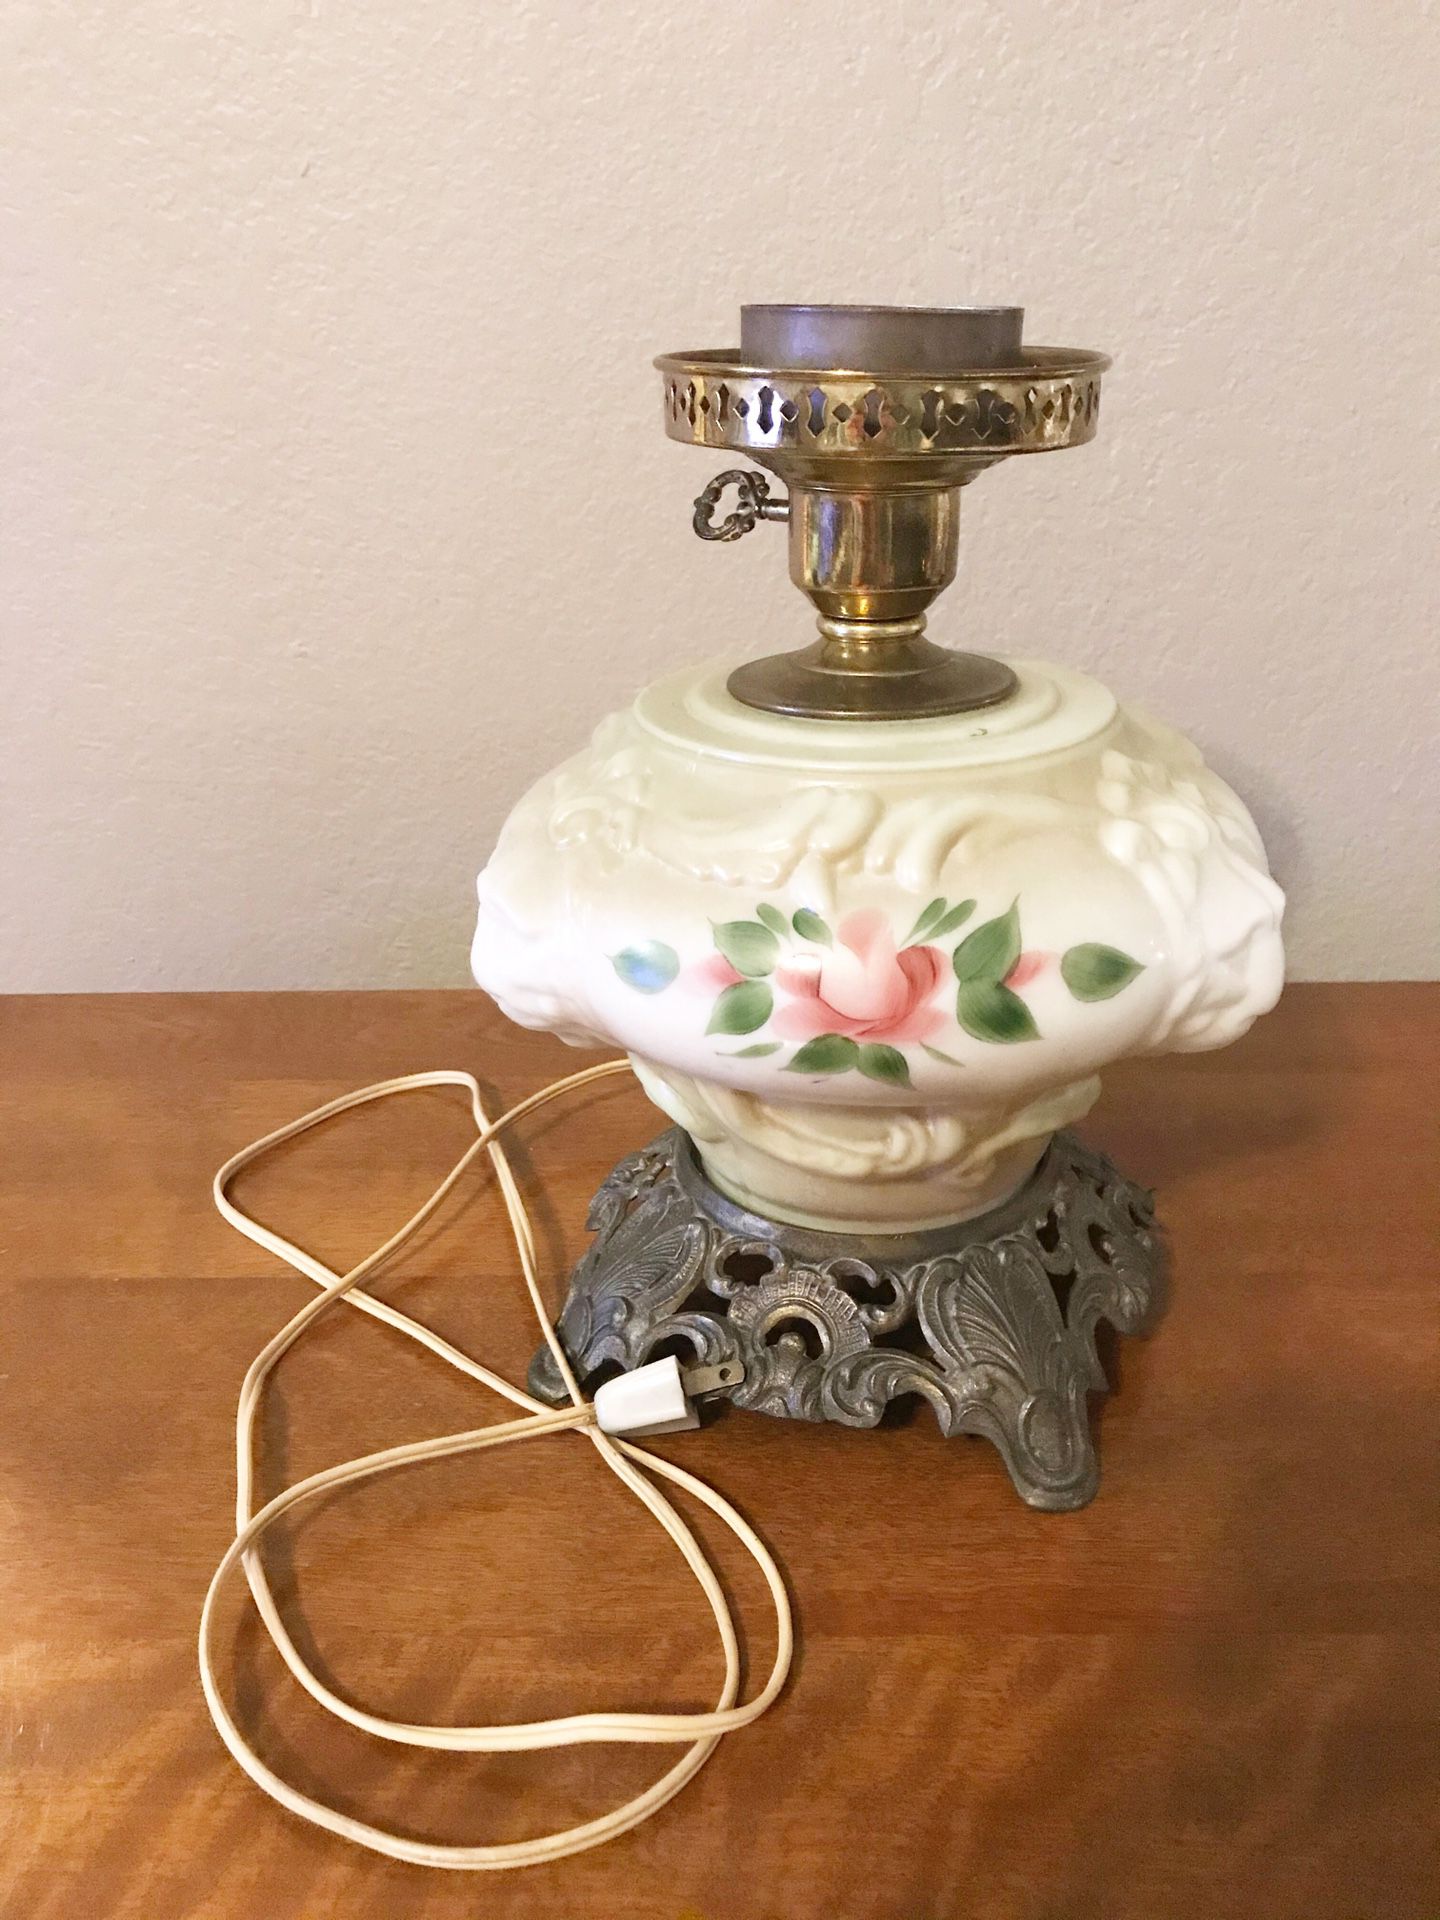 Vintage Lions Head Hurricane Lamp With Hand Painted Flowers